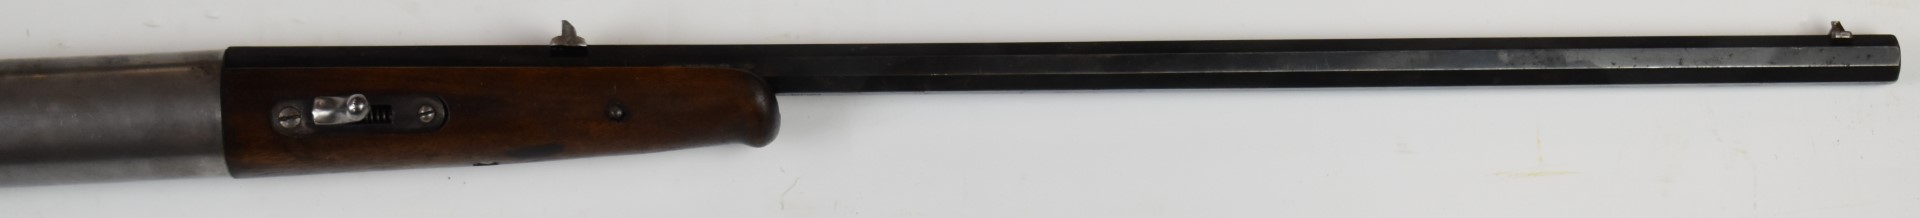 Oscar Will Bugelspanner .177 underlever air rifle with chequered grip, metal butt plate, - Image 4 of 8